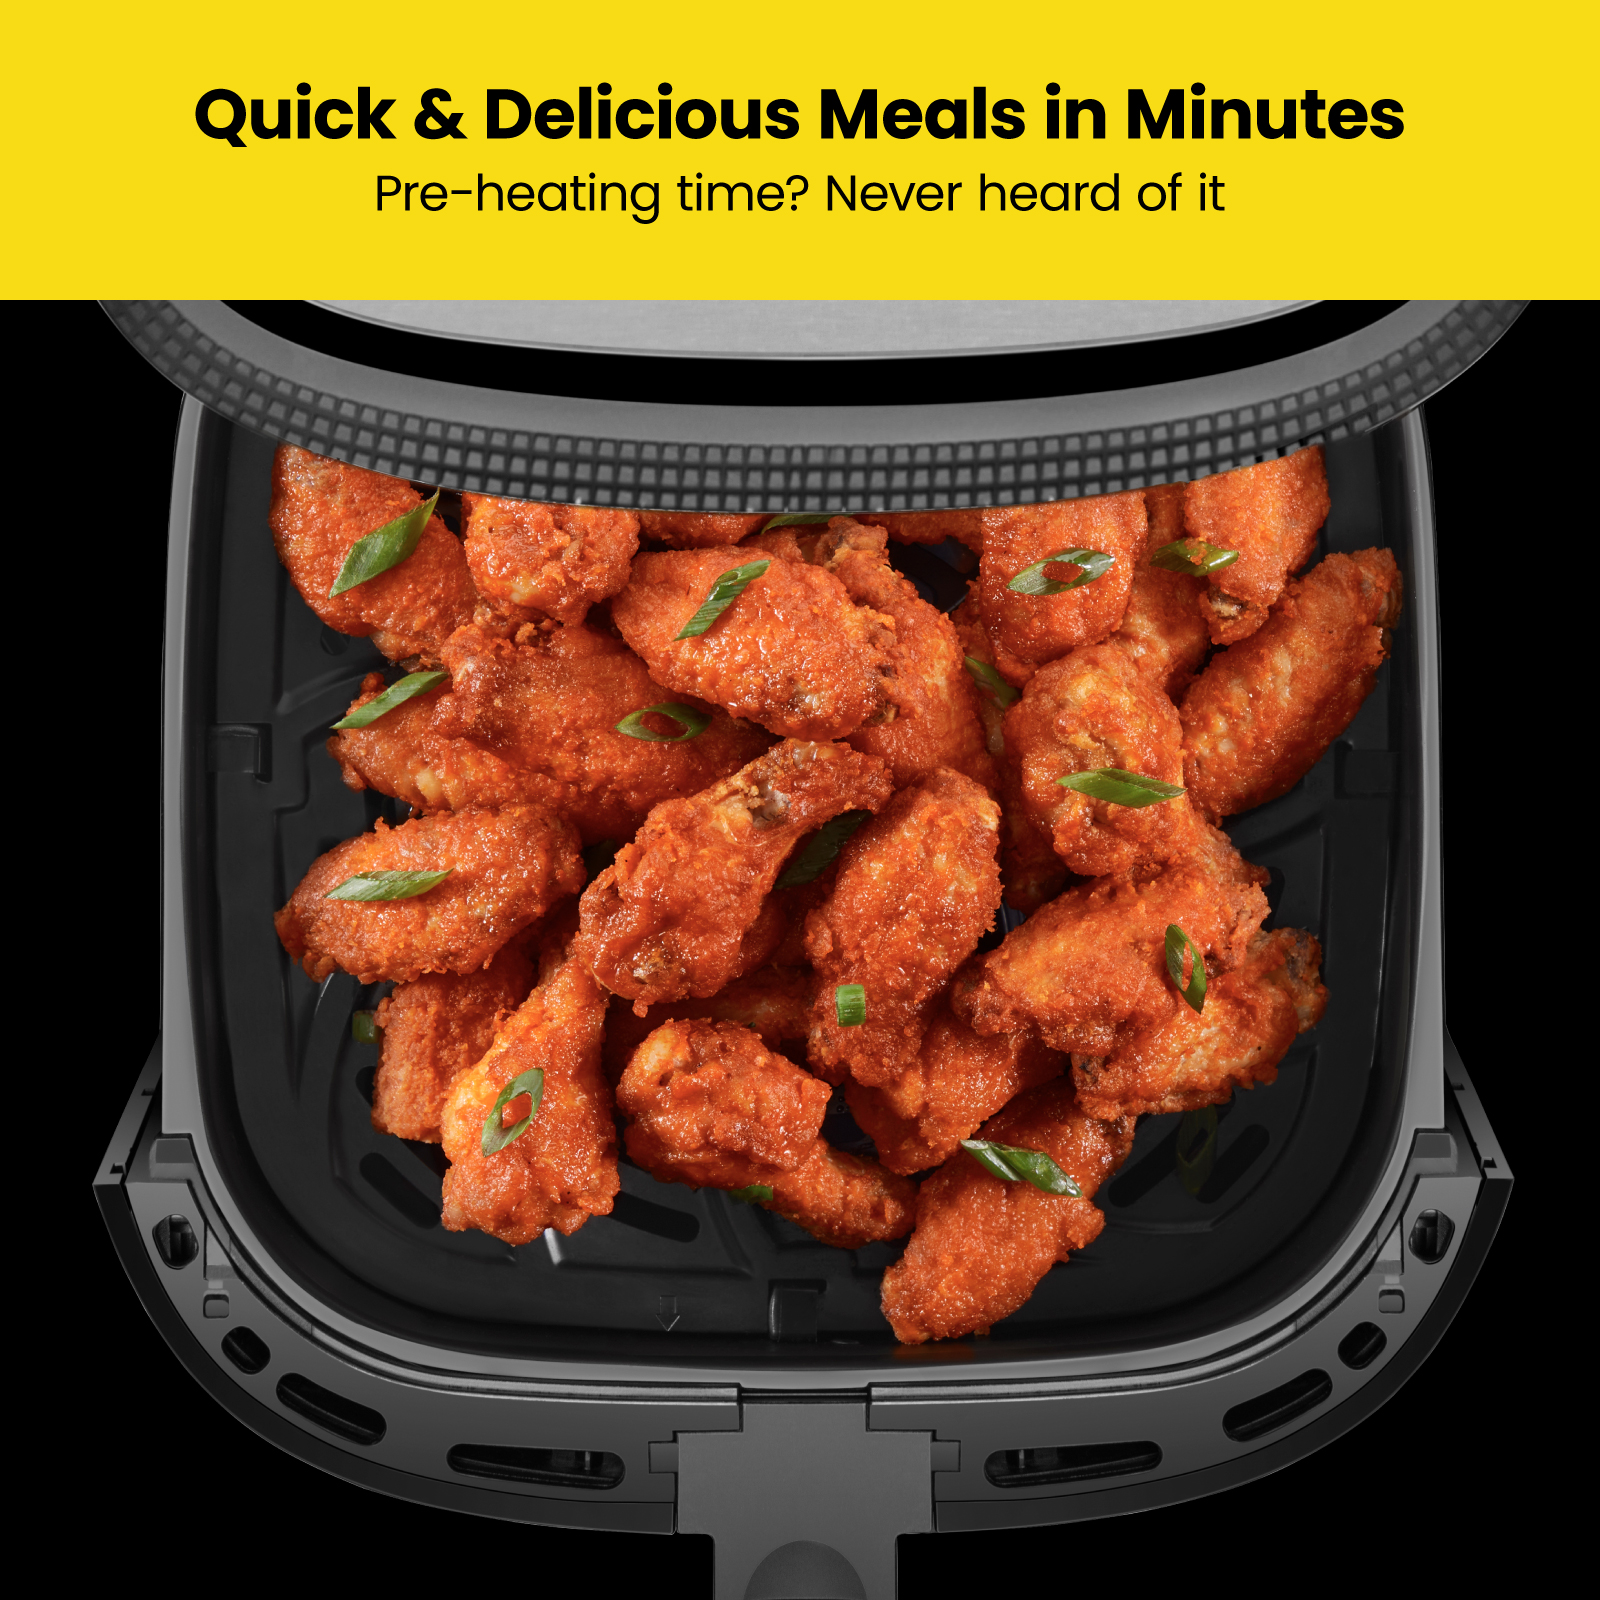 Chefman Turbofry Air Fryer w/ Digital Controls, 8 Qt Capacity - Stainless Steel, New - image 4 of 7